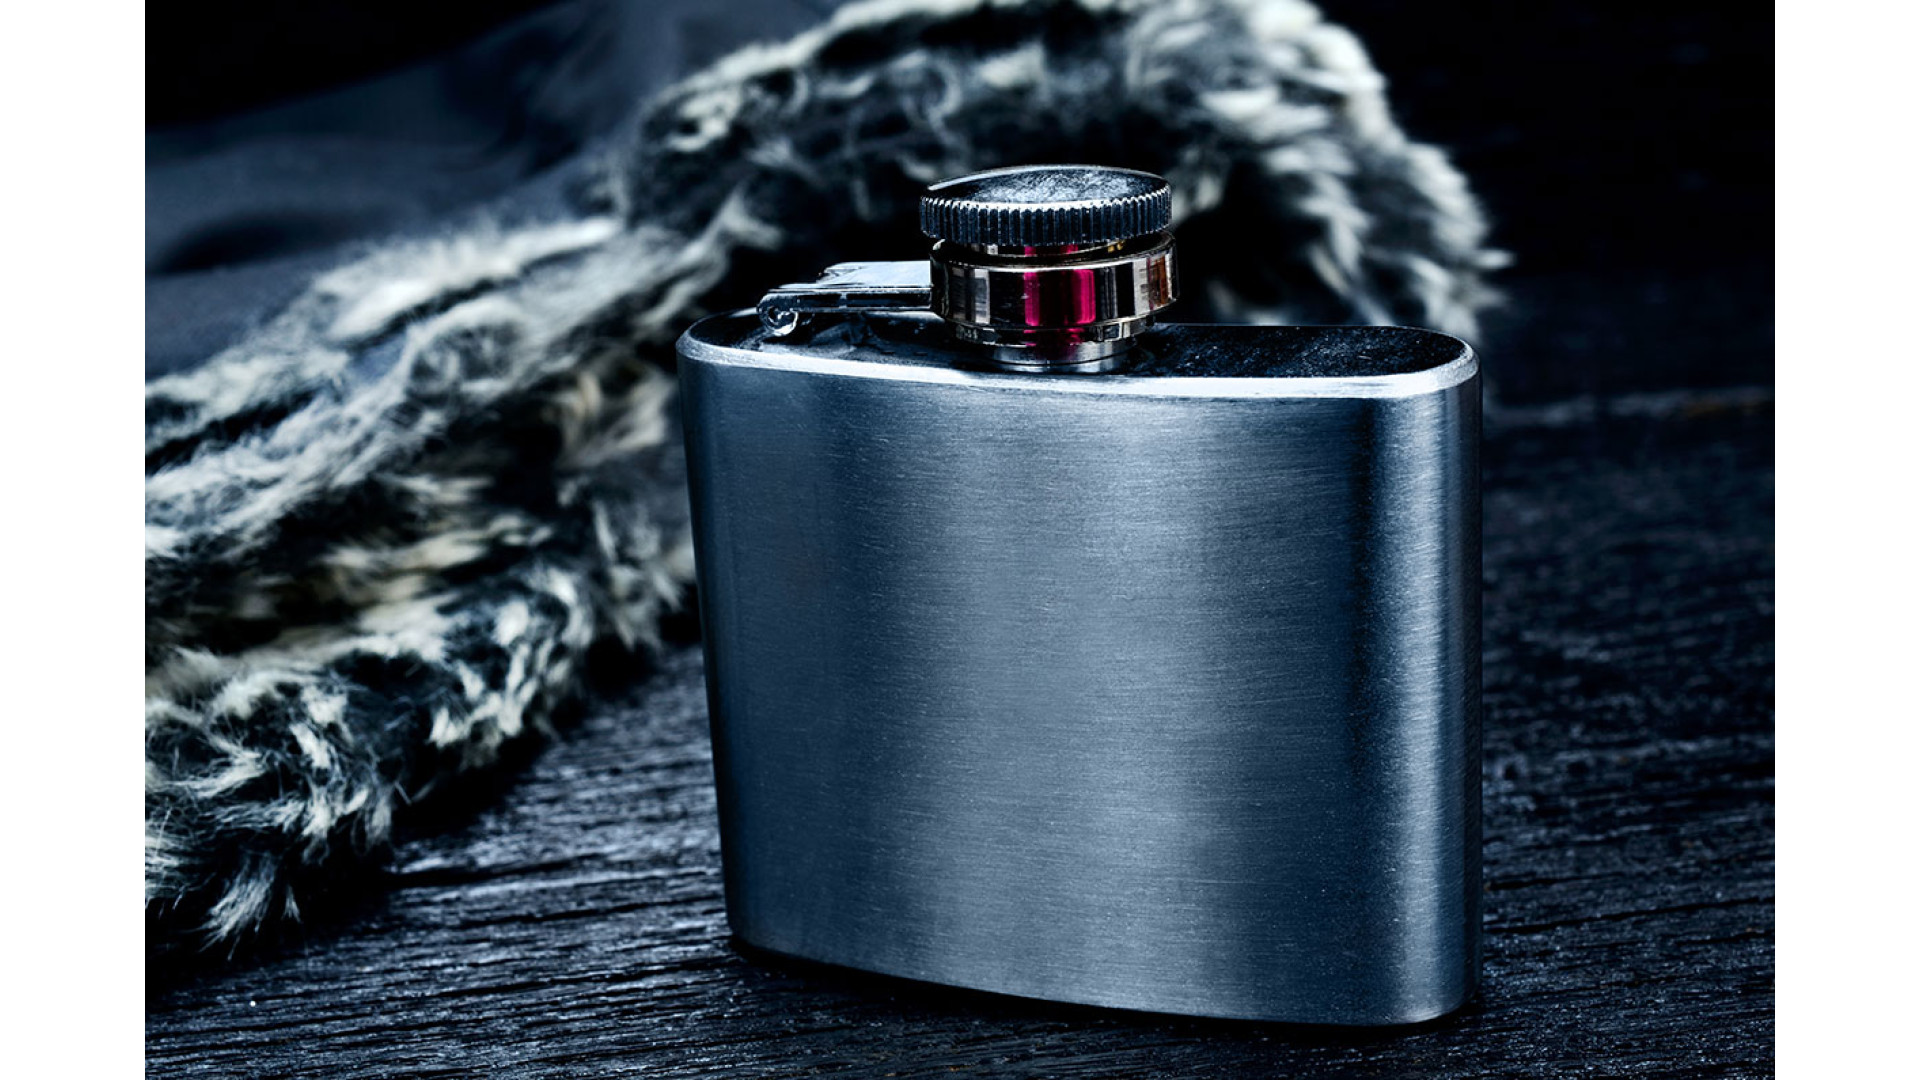 https://www.ckbproducts.com/image/cache/catalog/CKBn/what-makes-hip-flasks-a-perfect-accessory-for-all-seasons-1920x1080.jpg